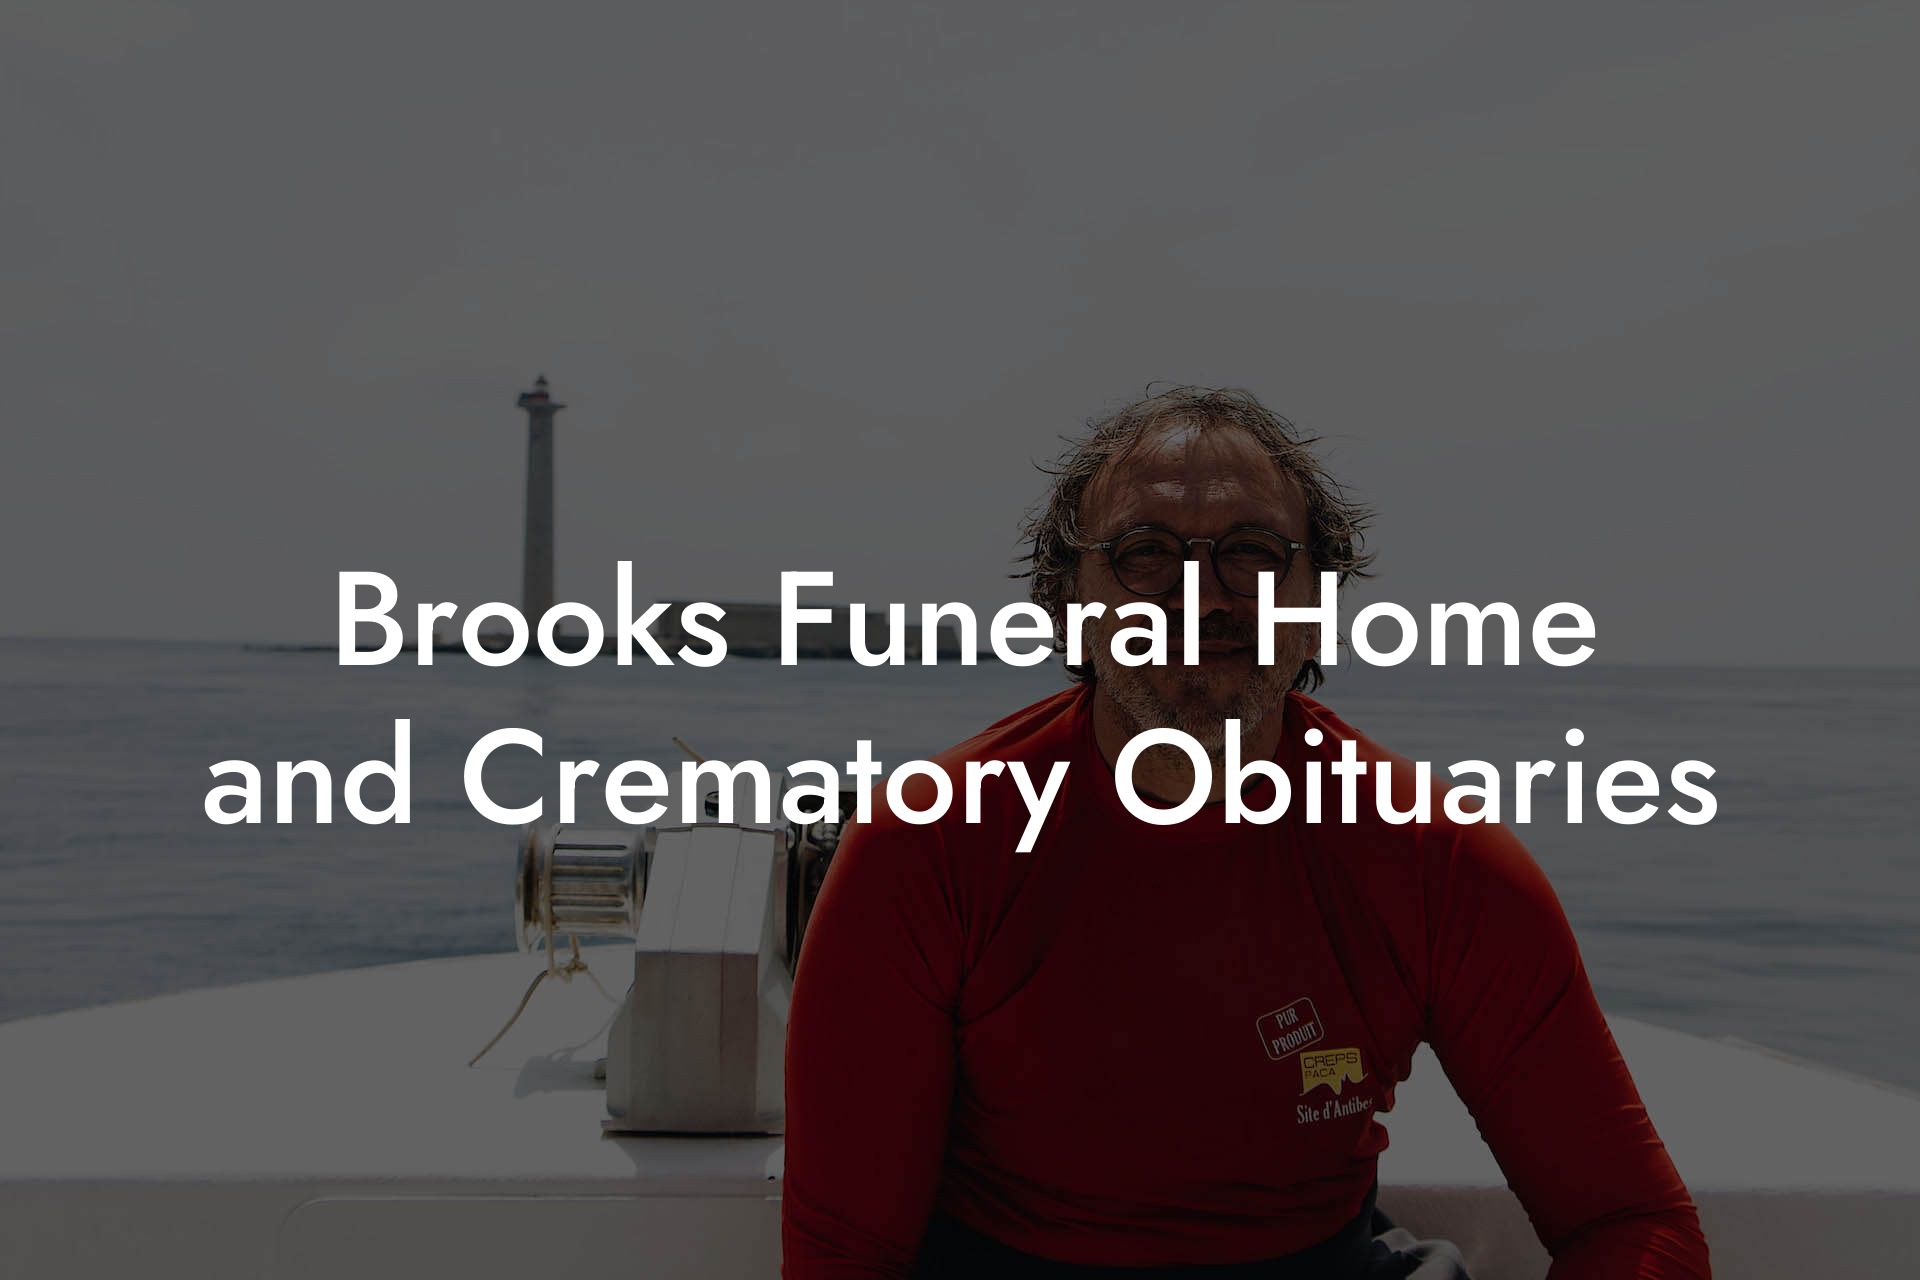 Brooks Funeral Home and Crematory Obituaries